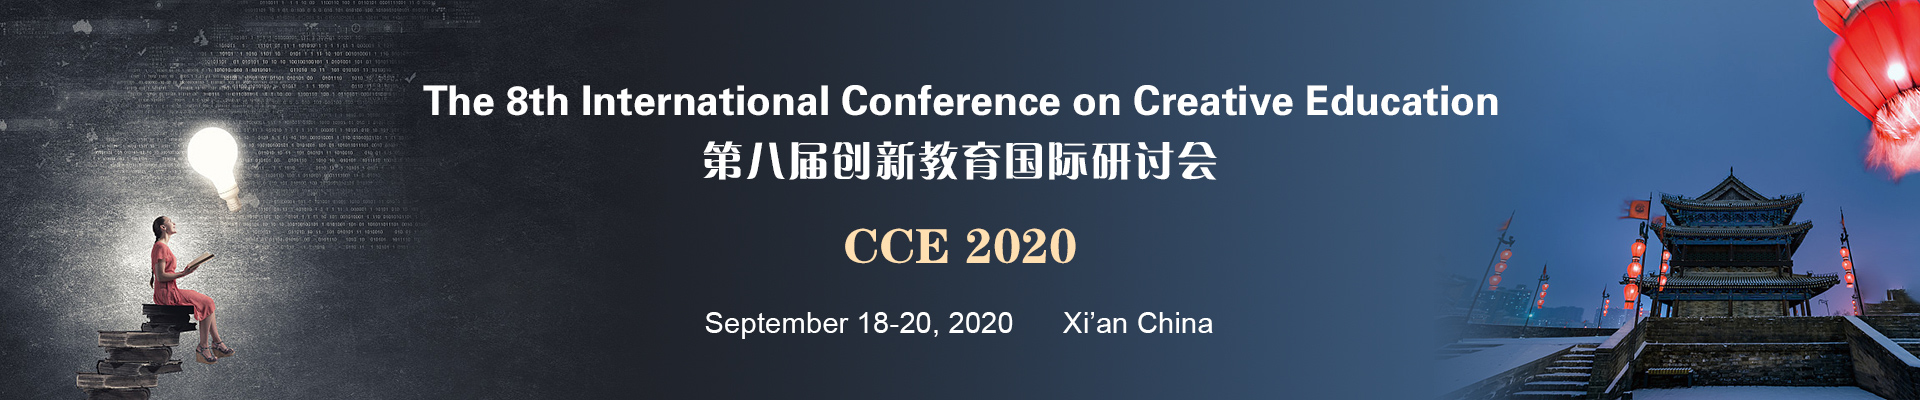 The 8th International Conference on Creative Education (CCE 2020), X, Shaanxi, China